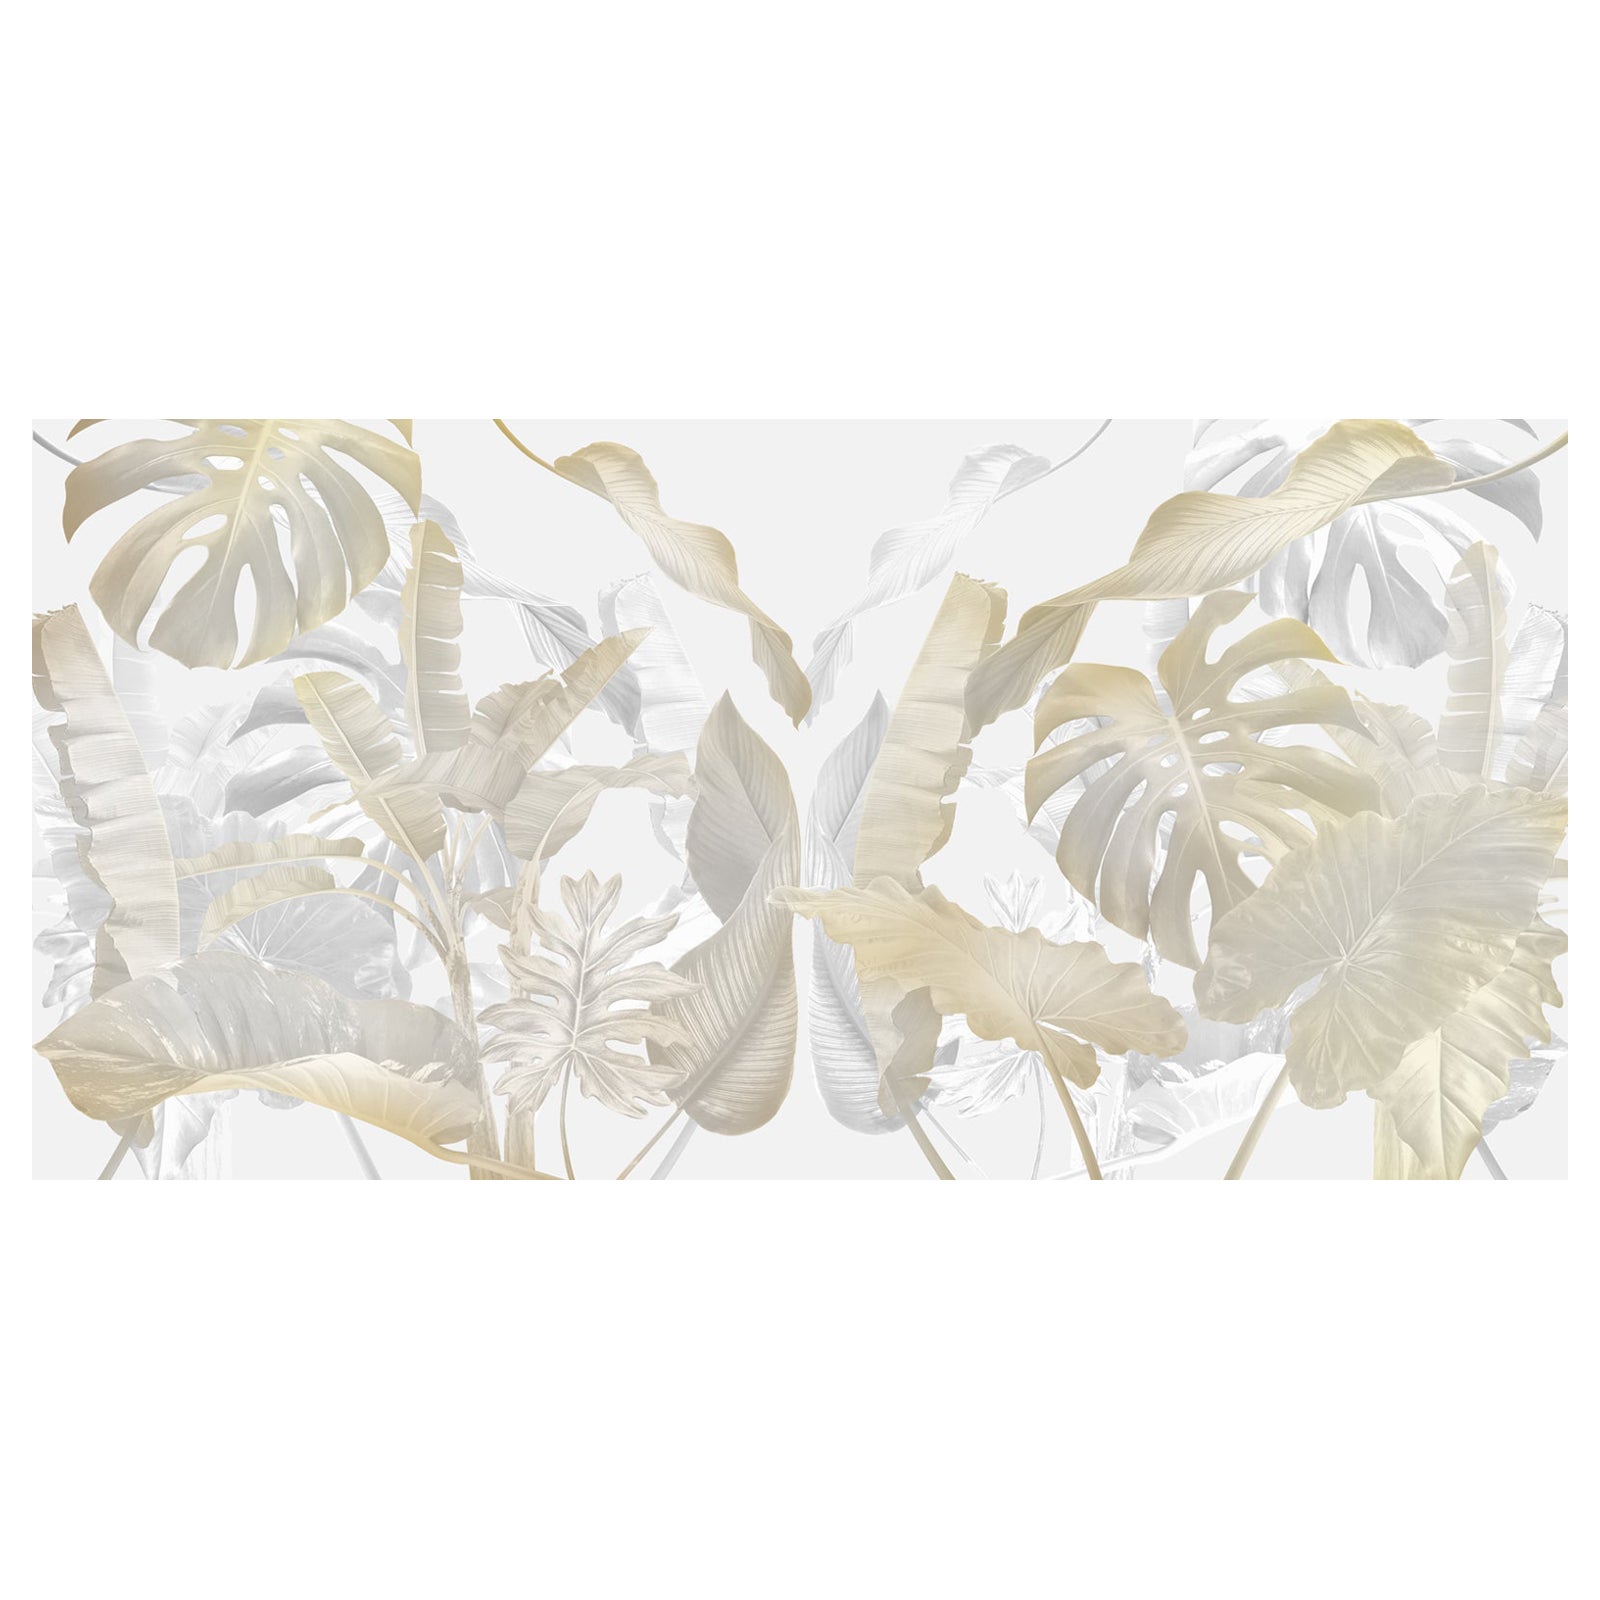 EDGE Collections JungleScape Gold; a whimsical nod to endless Summers For Sale